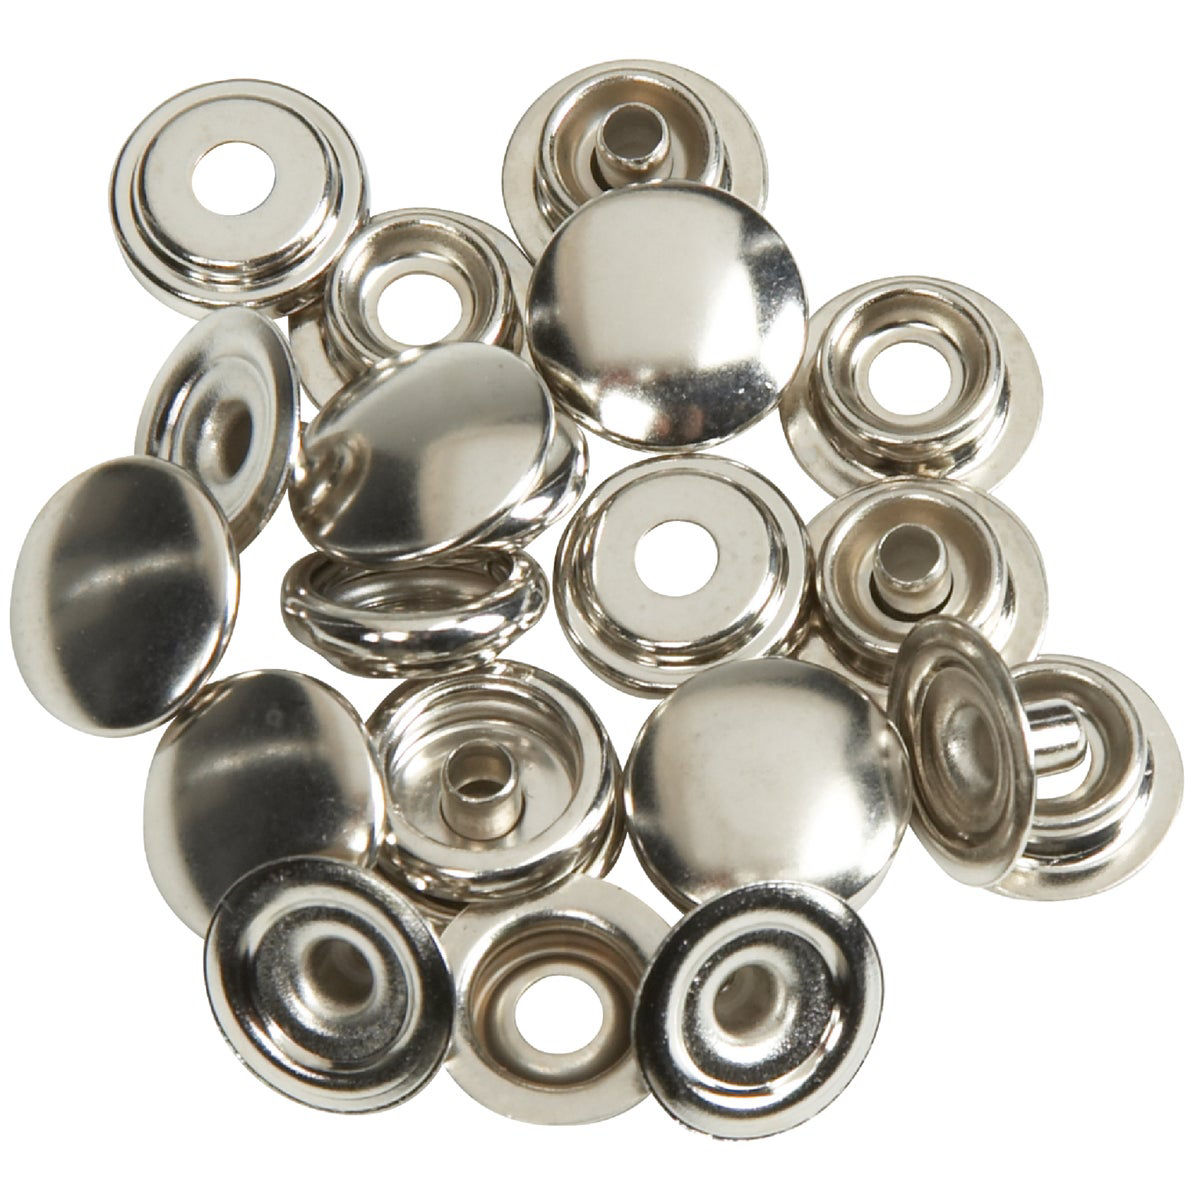 Lord & Hodge Grommets and Snap Fasteners